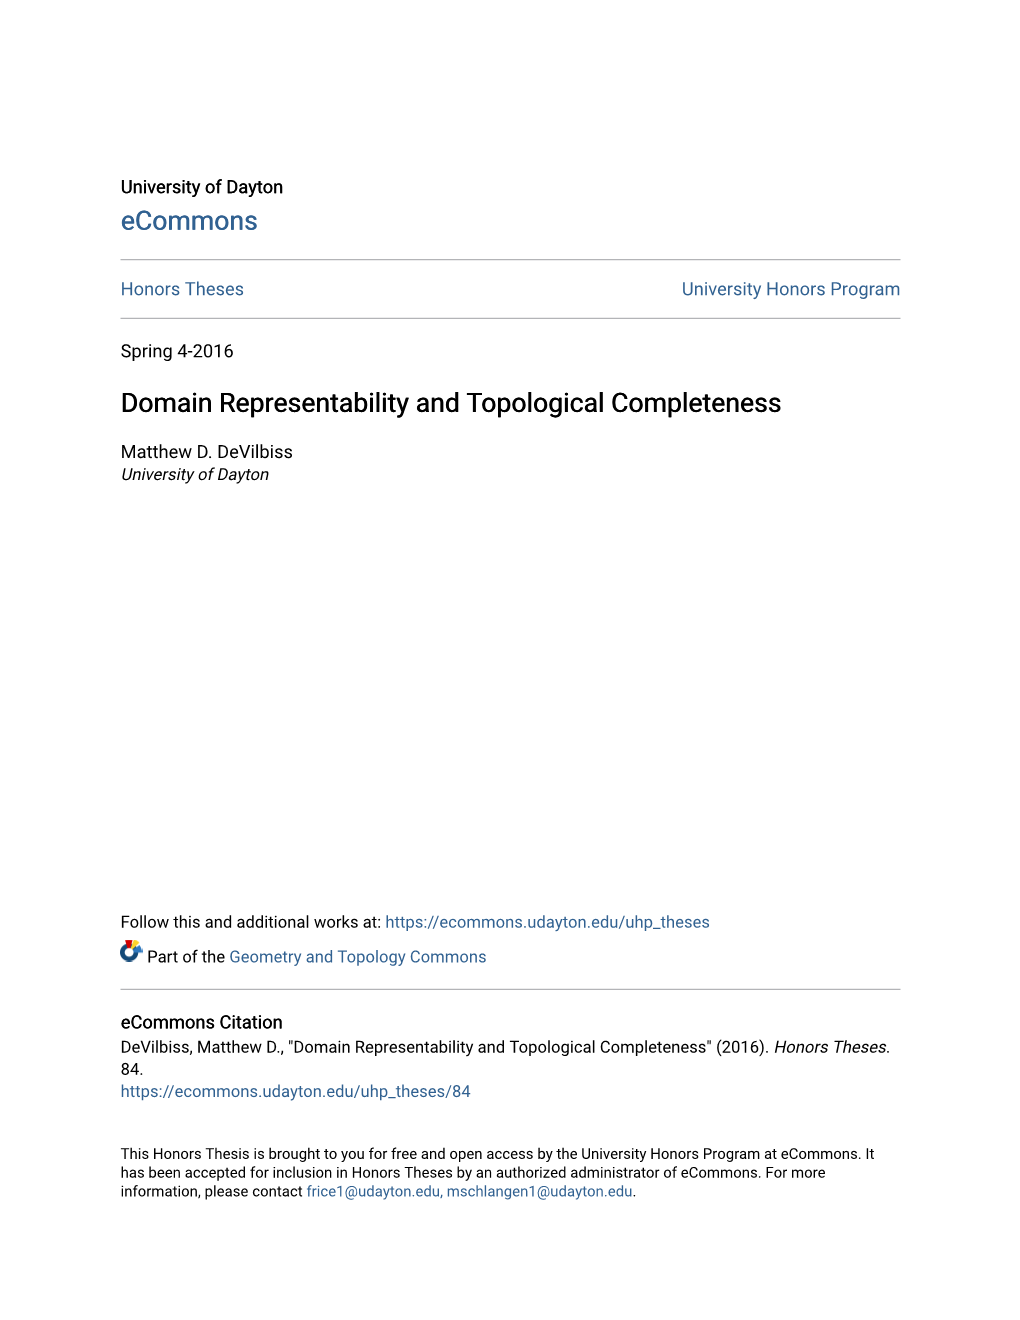 Domain Representability and Topological Completeness